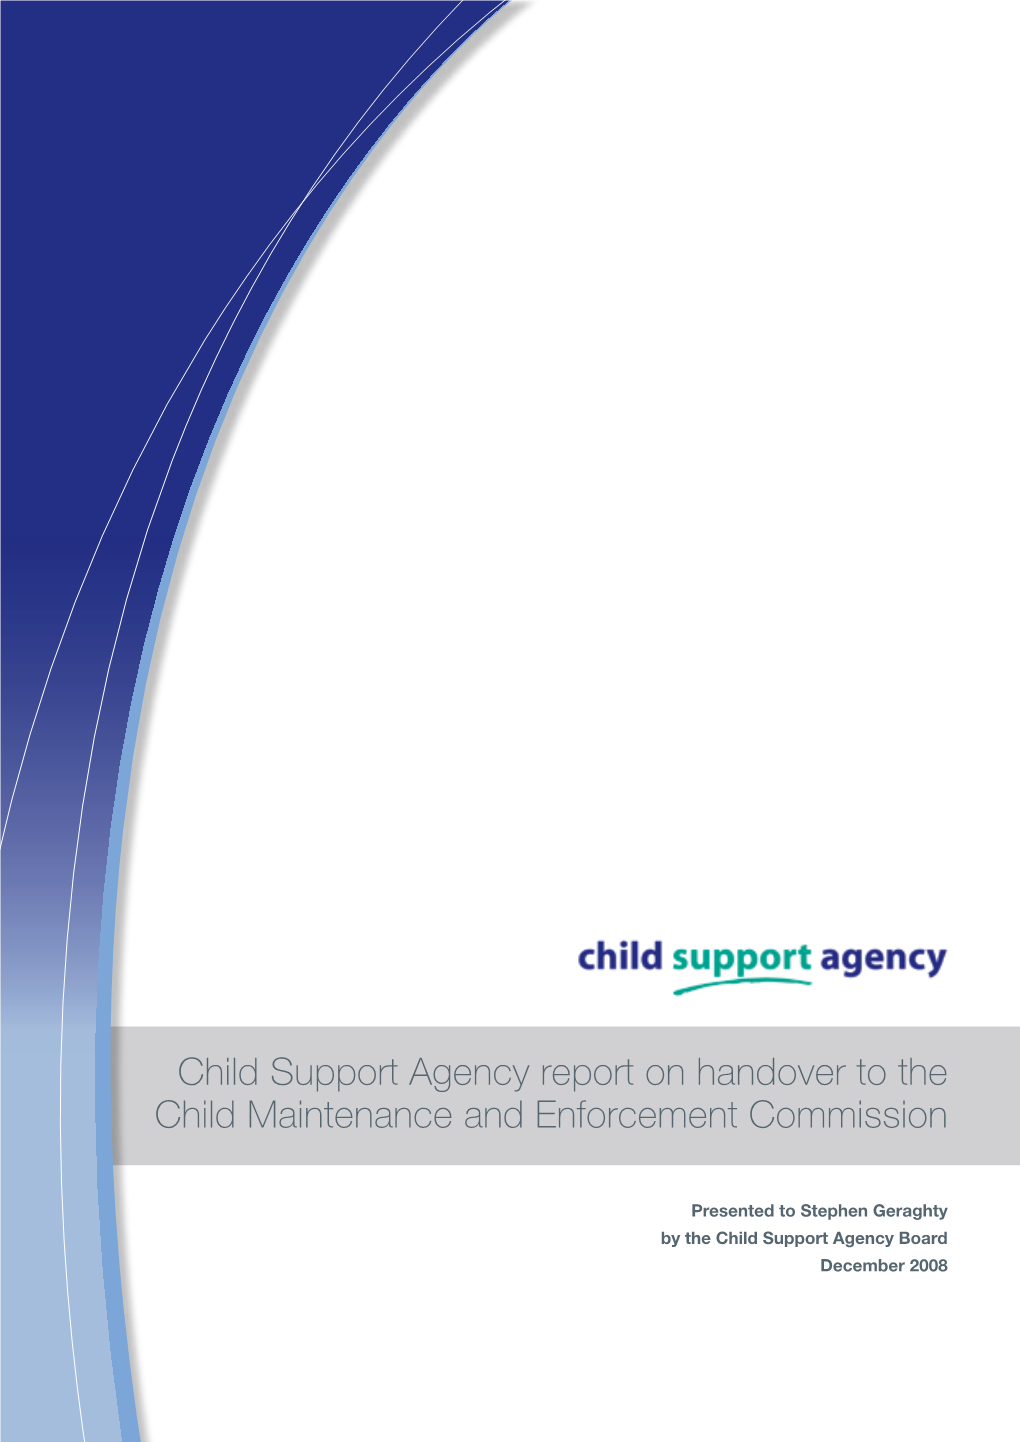 Child Support Agency Report on Handover to the Child Maintenance and Enforcement Commission